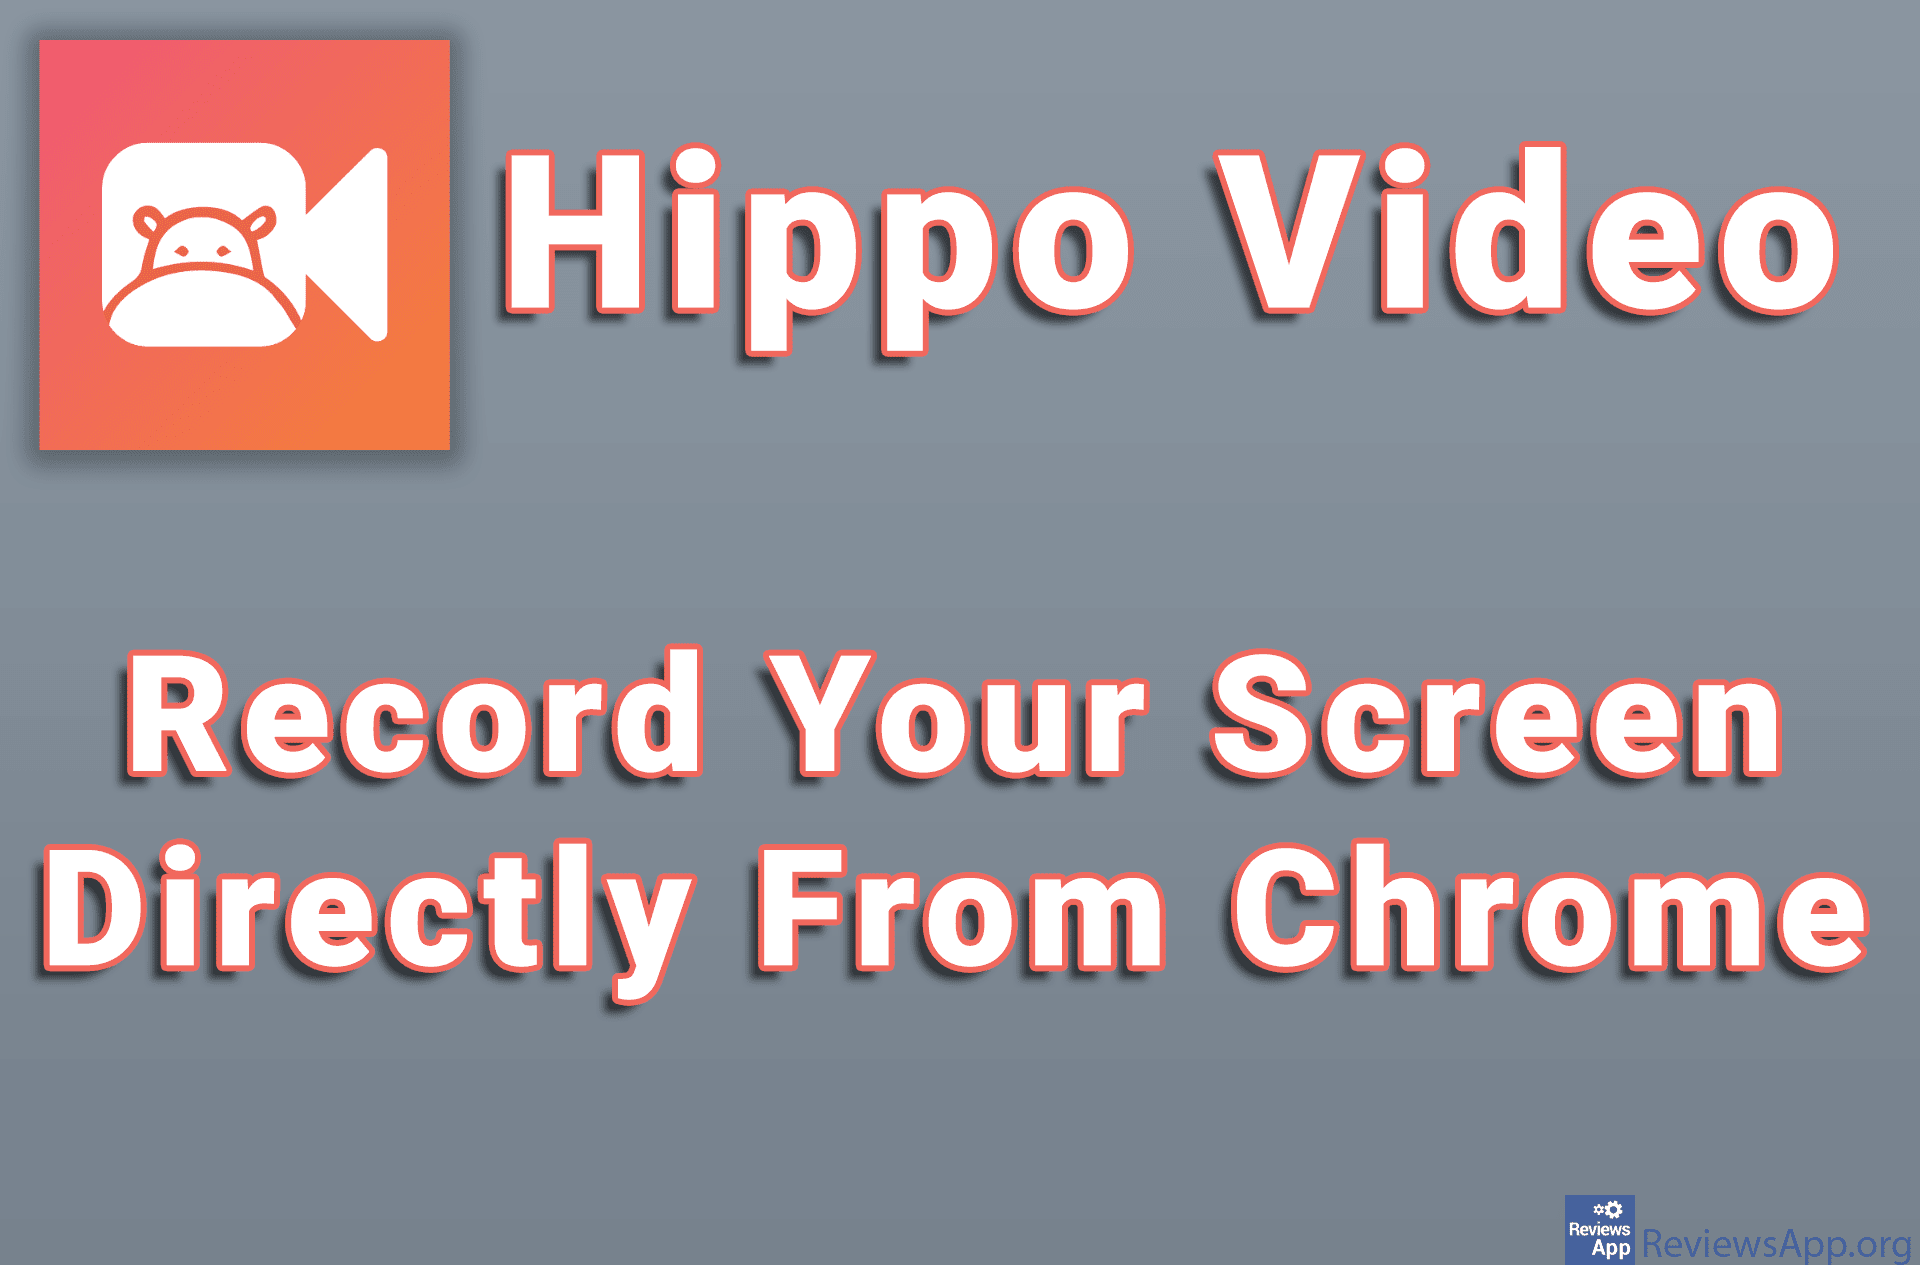 Hippo Video – Record Your Screen Directly From Chrome